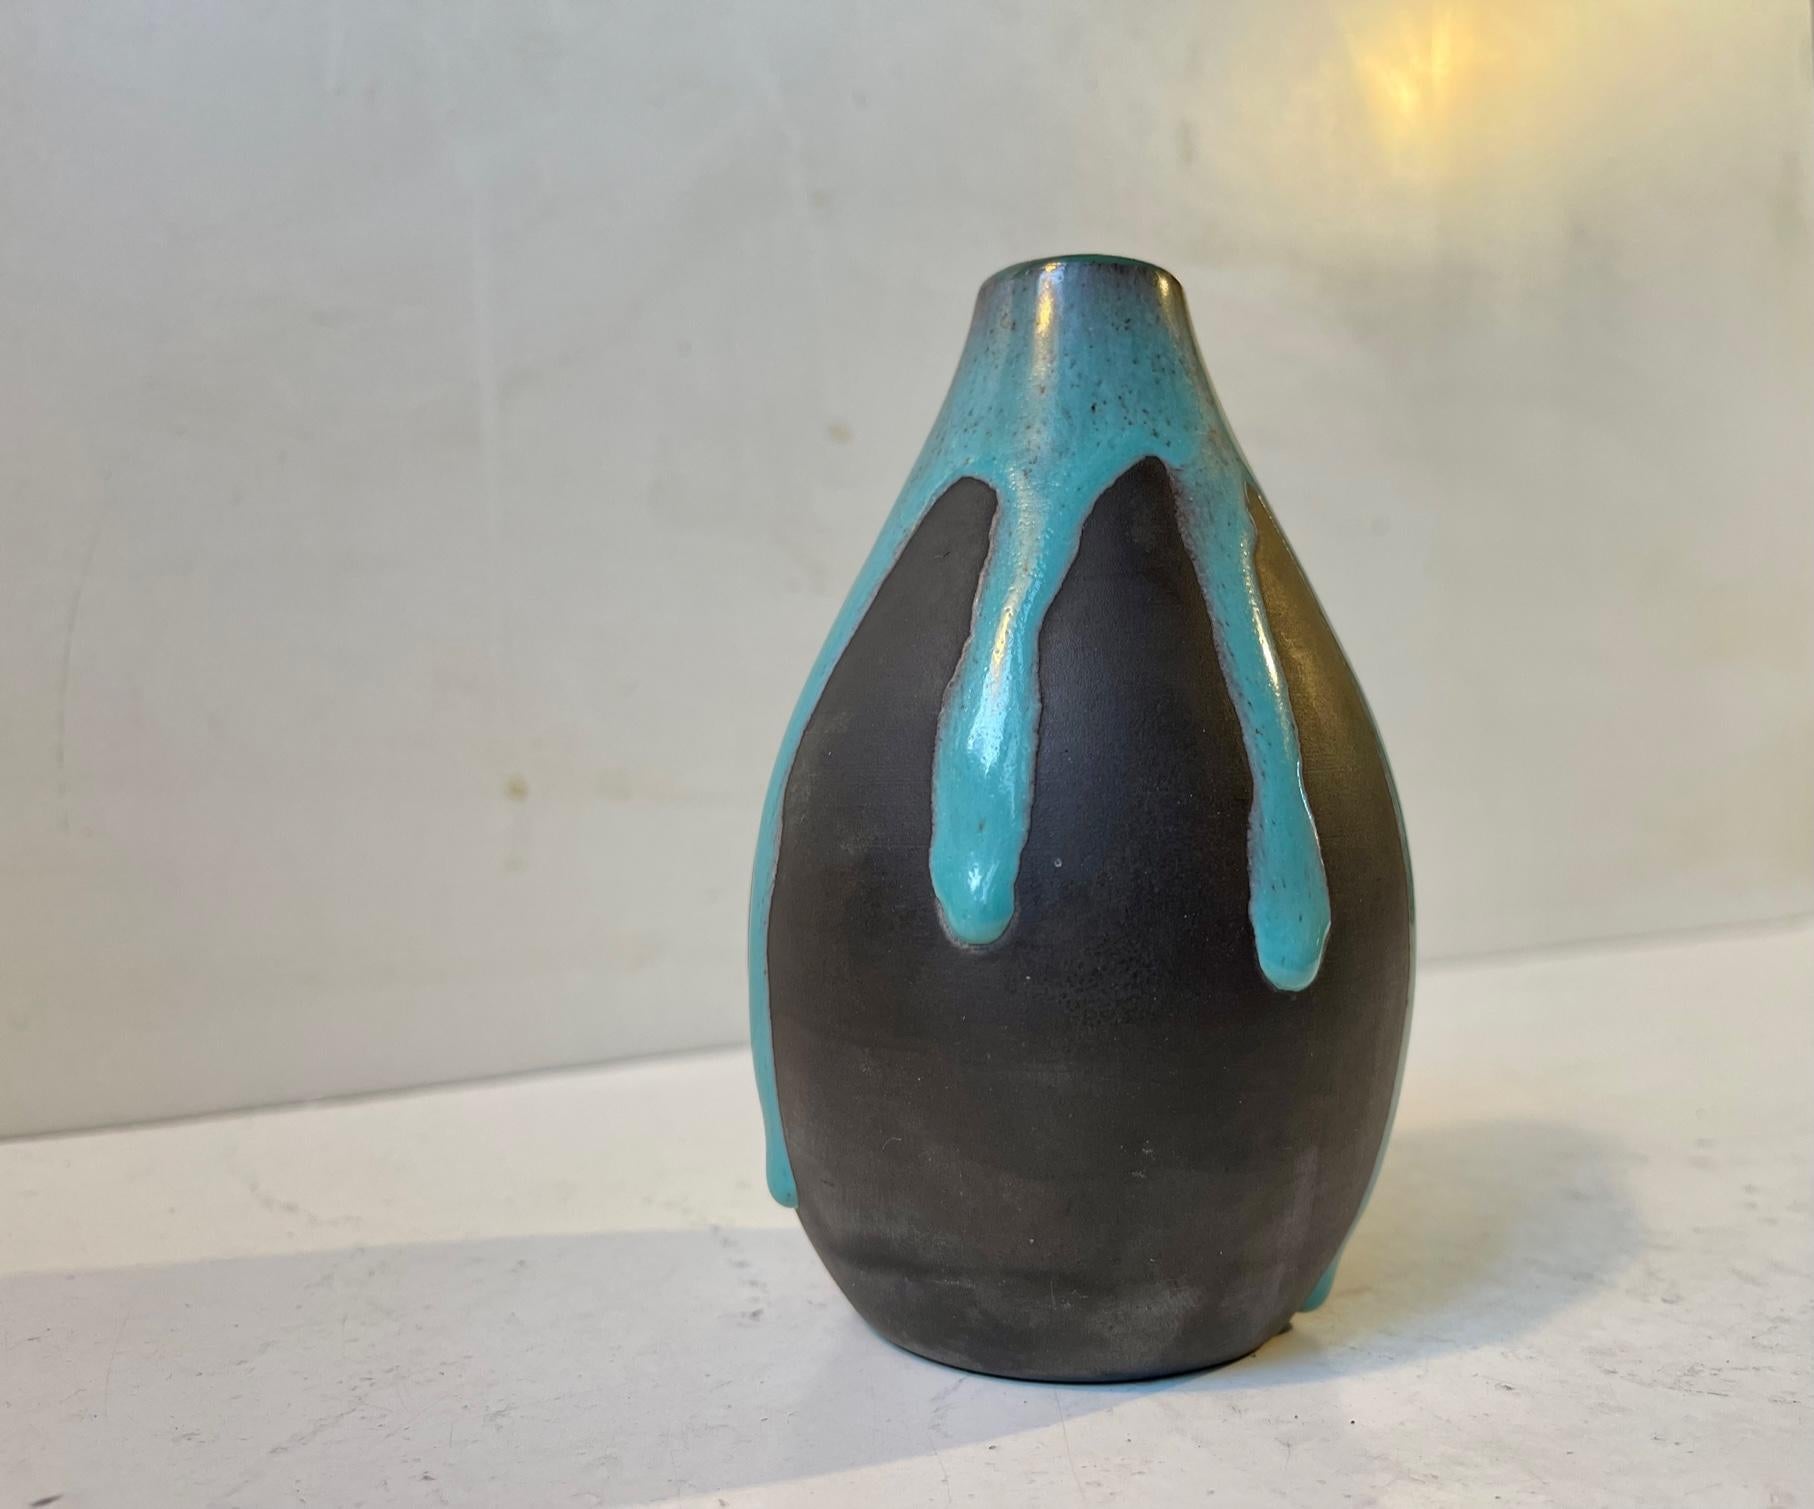 Ceramic vase decorated with petrol blue greenish drip-glaze. Designed by the danish ceramist Helge Østerberg and manufactured at his own studio during the 1960s. Its signed Ø. Measurements: Height: 12 cm, Diameter: 8 cm.